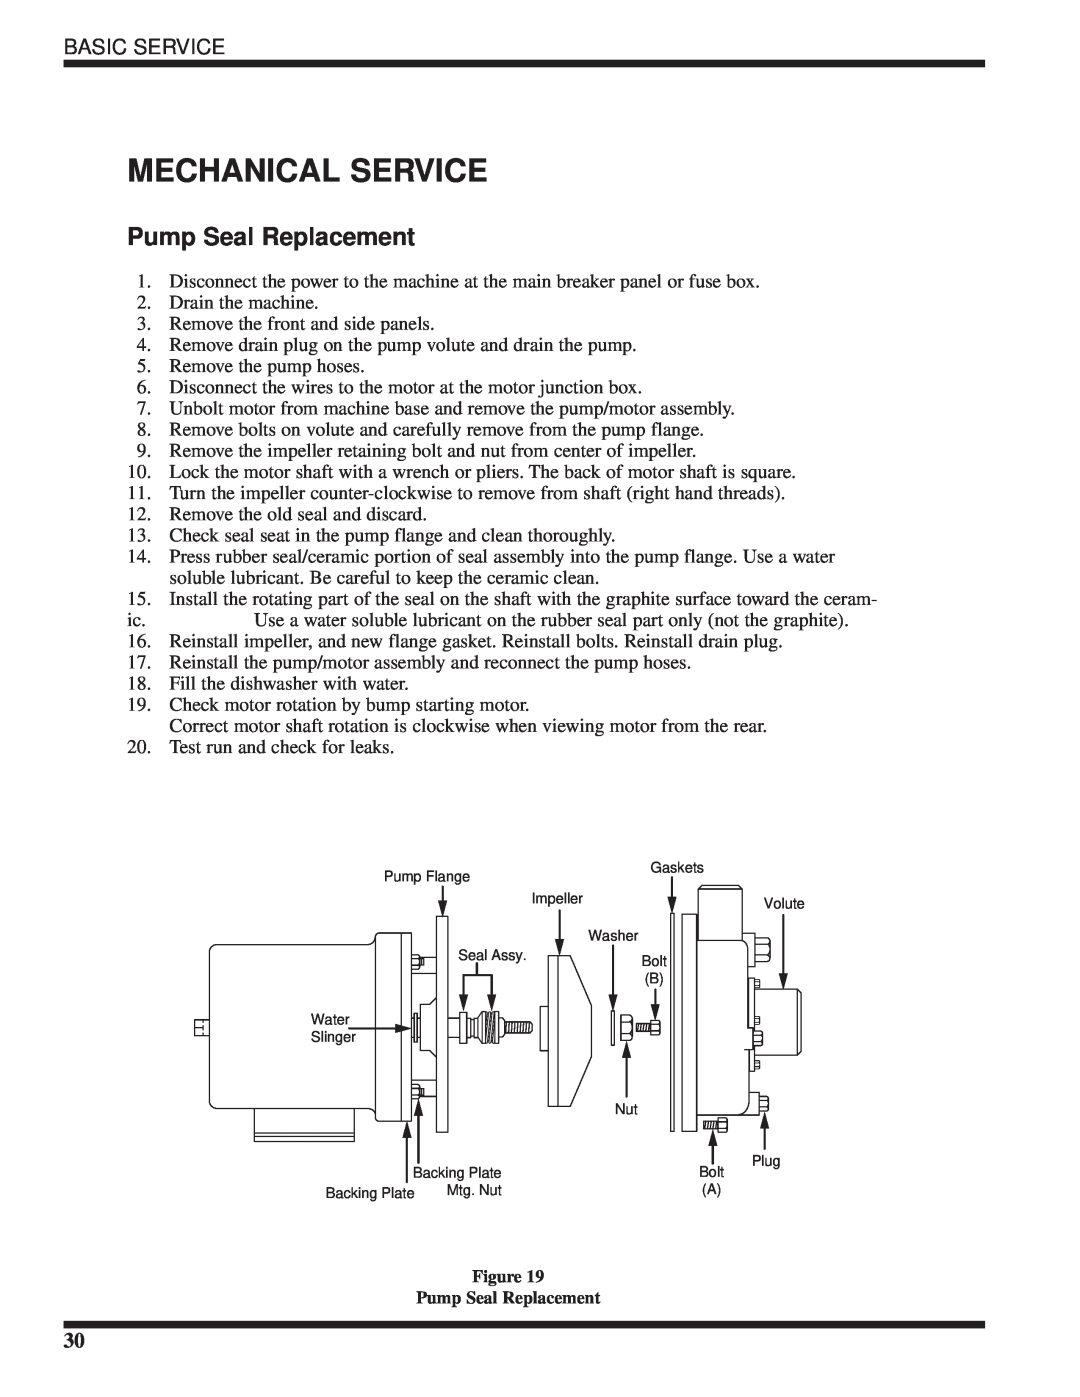 Moyer Diebel MH-60M5, MH-6NM5, MH-6LM5 technical manual Mechanical Service, Pump Seal Replacement, Basic Service 